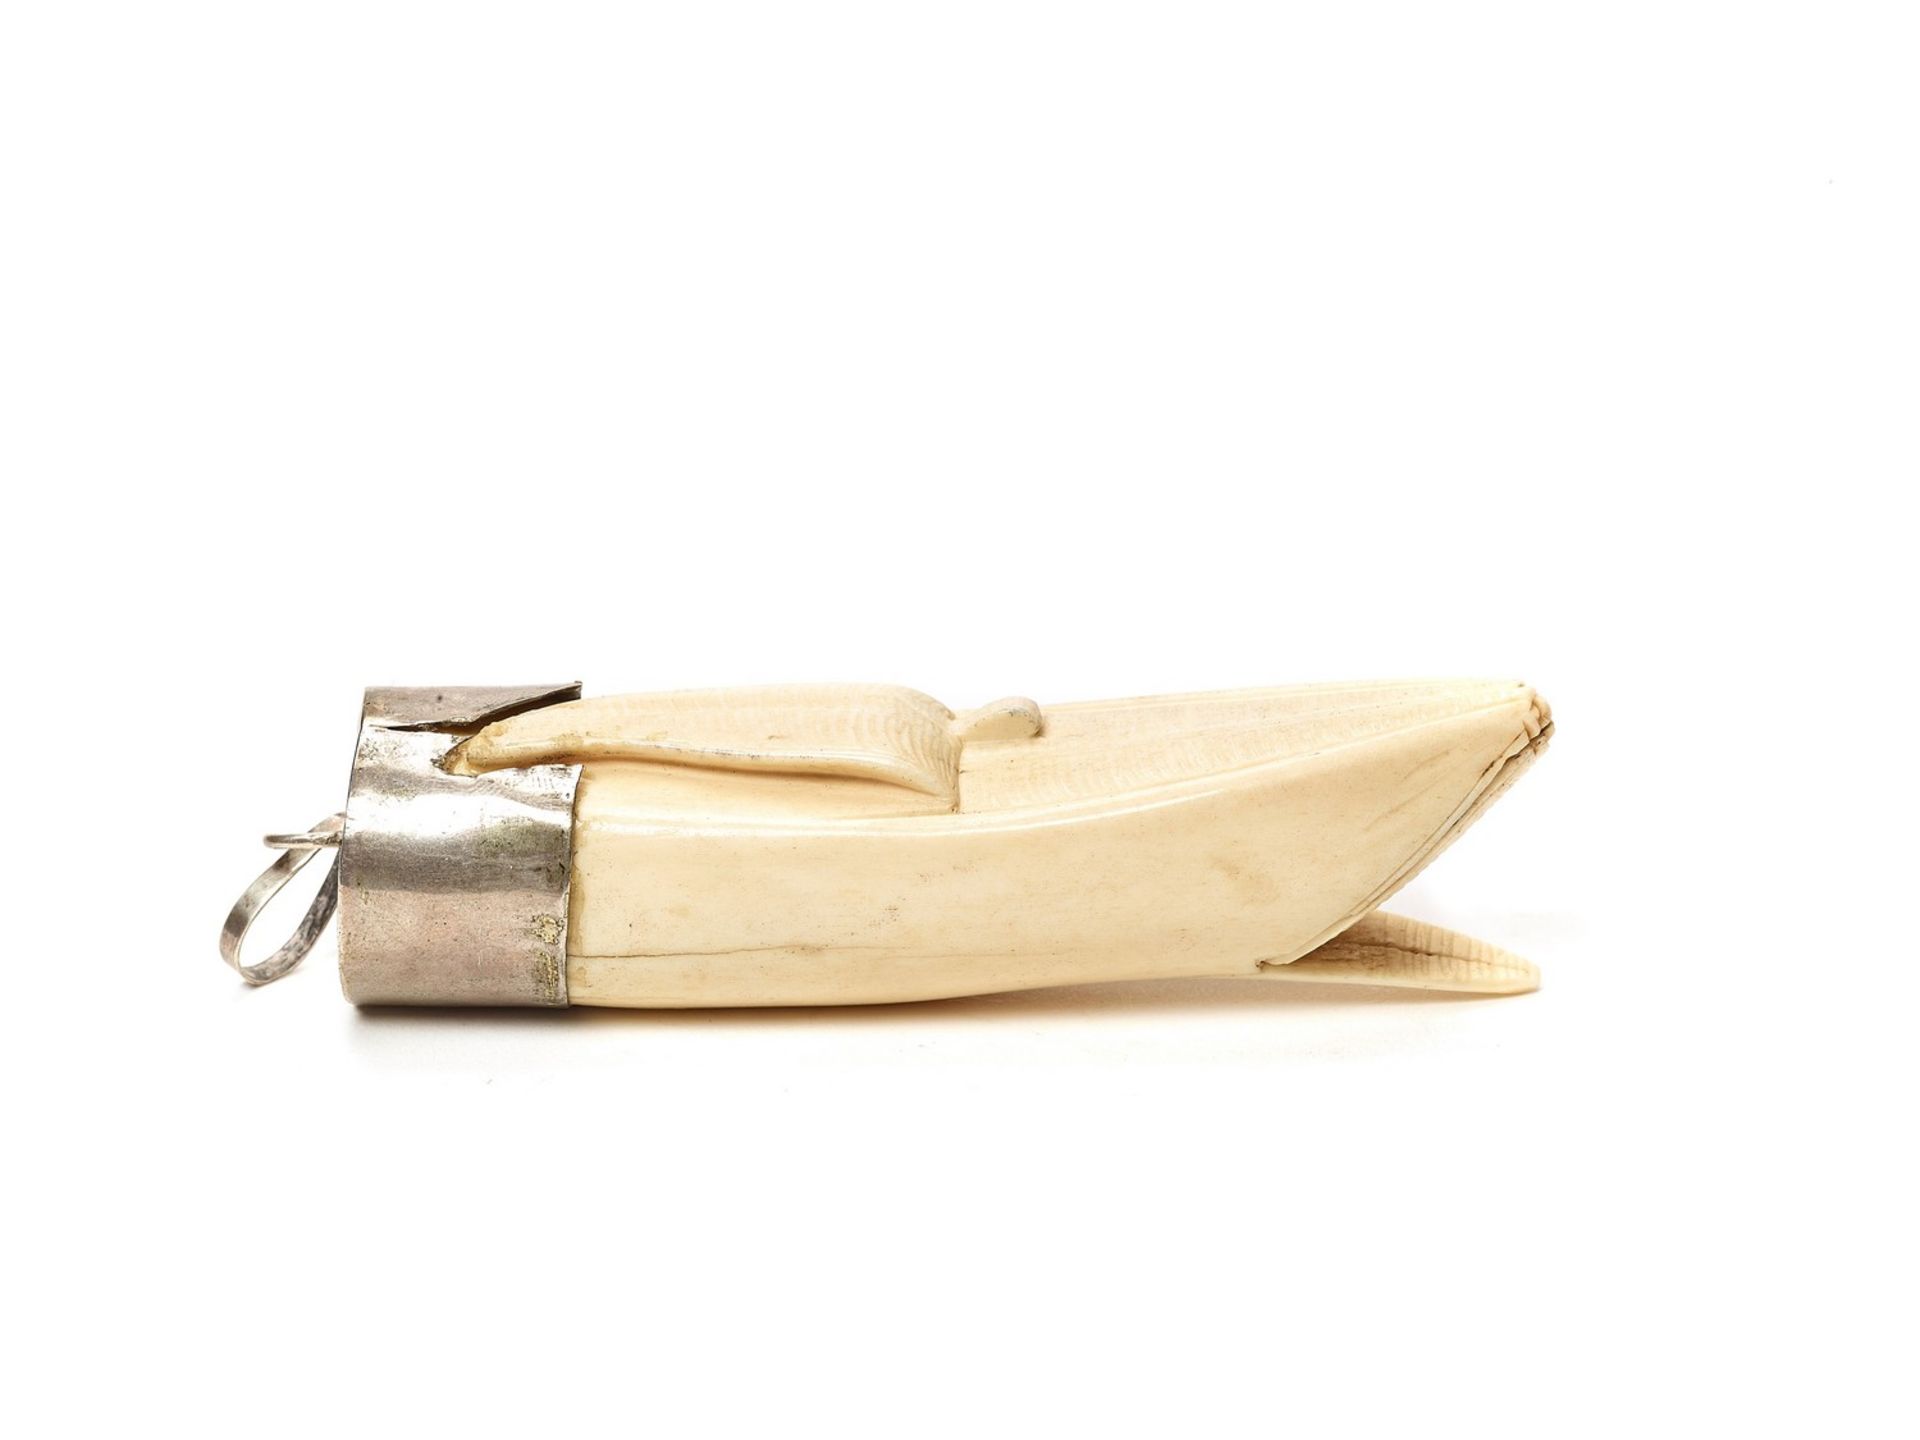 AN IVORY OKIMONO OF A PEELING BANANA WITH SILVER MOUNT - Image 4 of 4